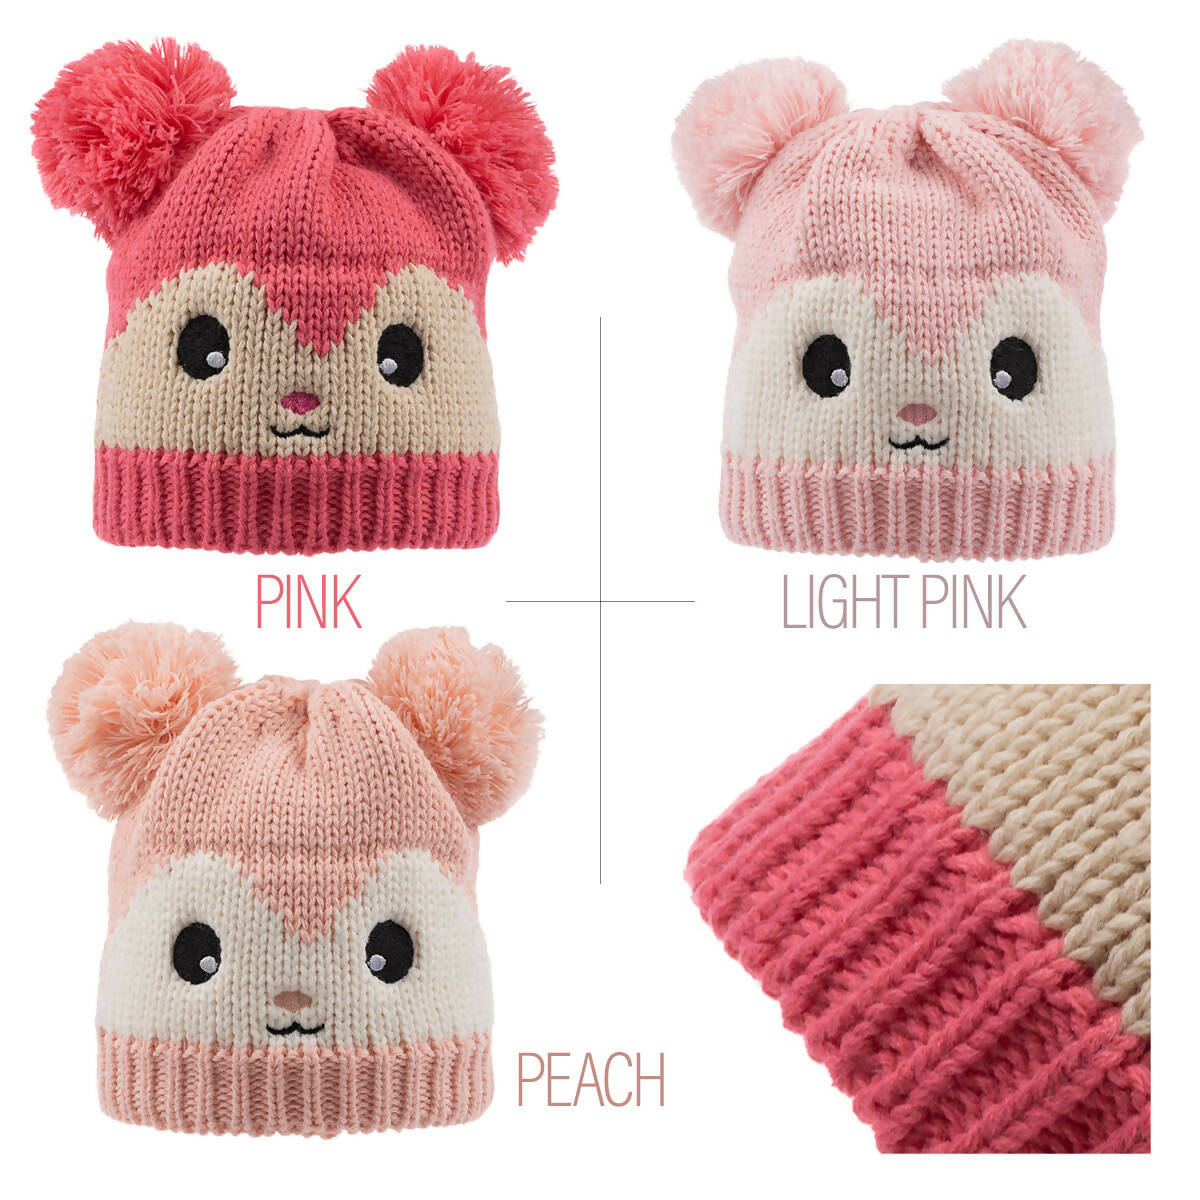 Two Seaside Babes Cranberry Red Button Beanie Crochet Baby Hat for Newborn Girls & Boys 0 - 3 Month